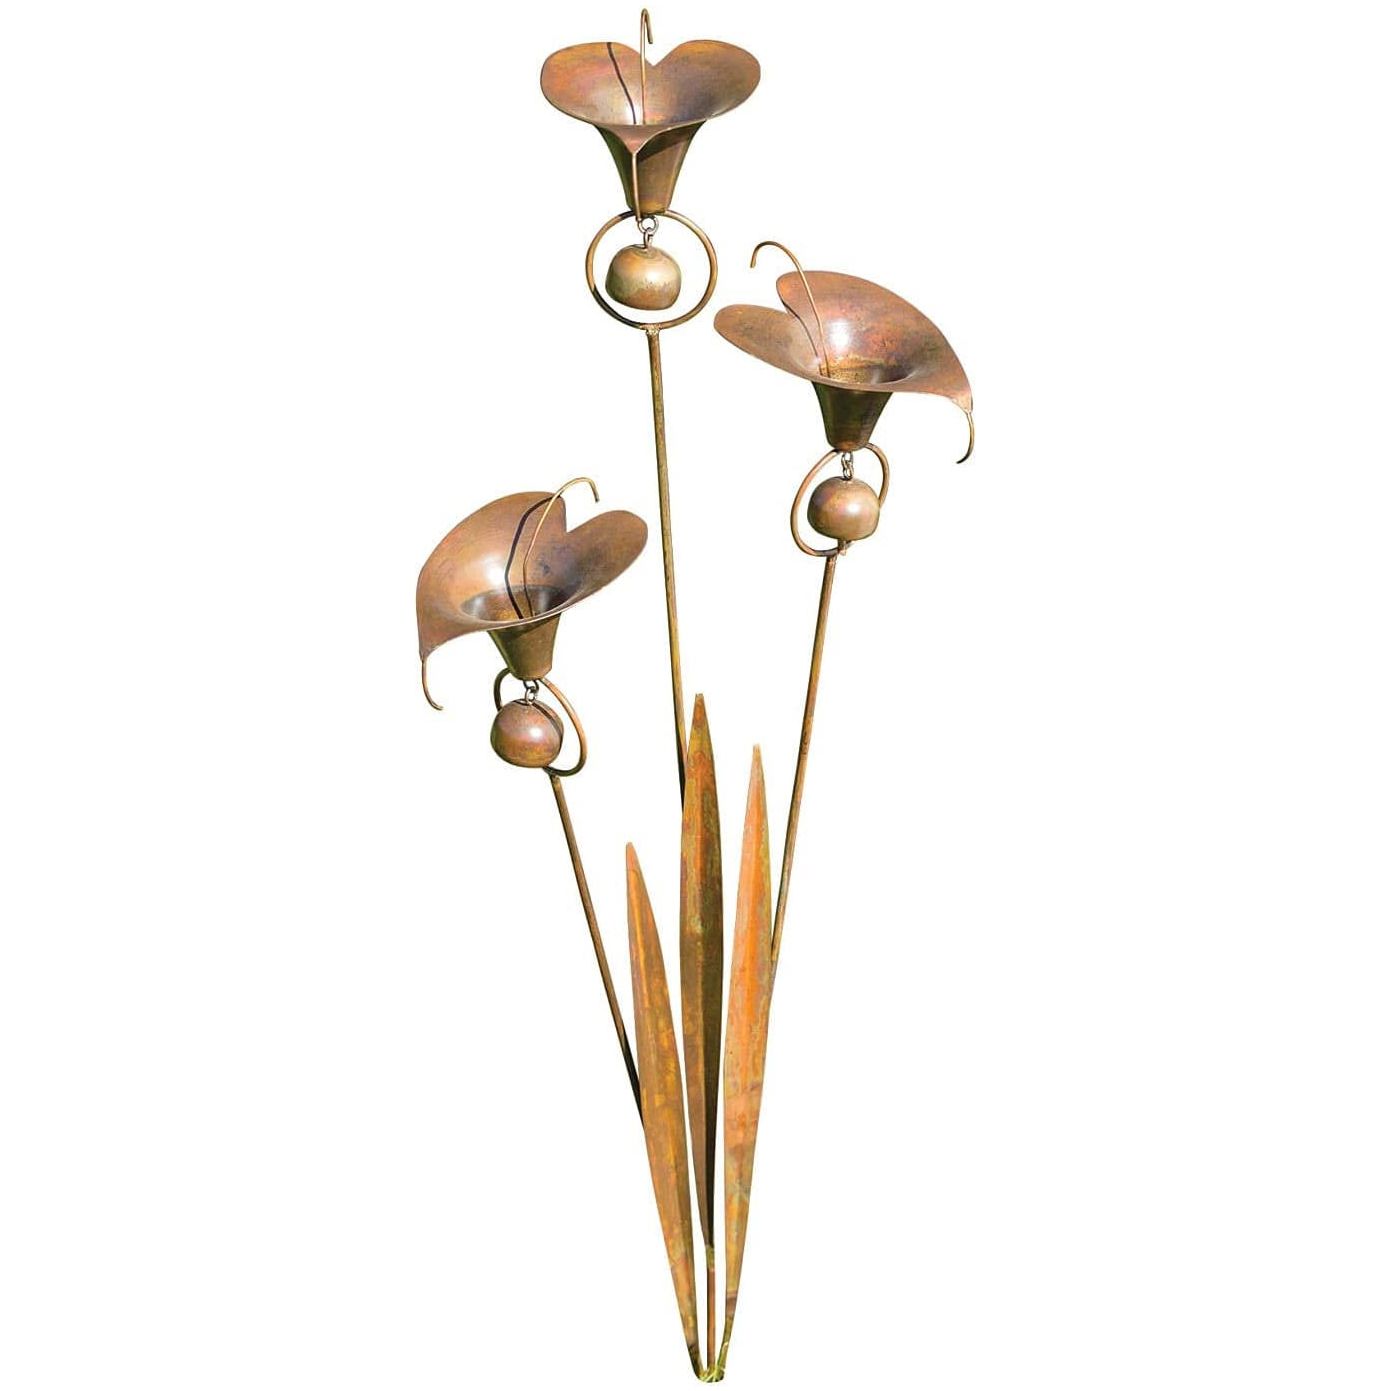 Flamed Calla Lily Stainless Steel Garden Stake